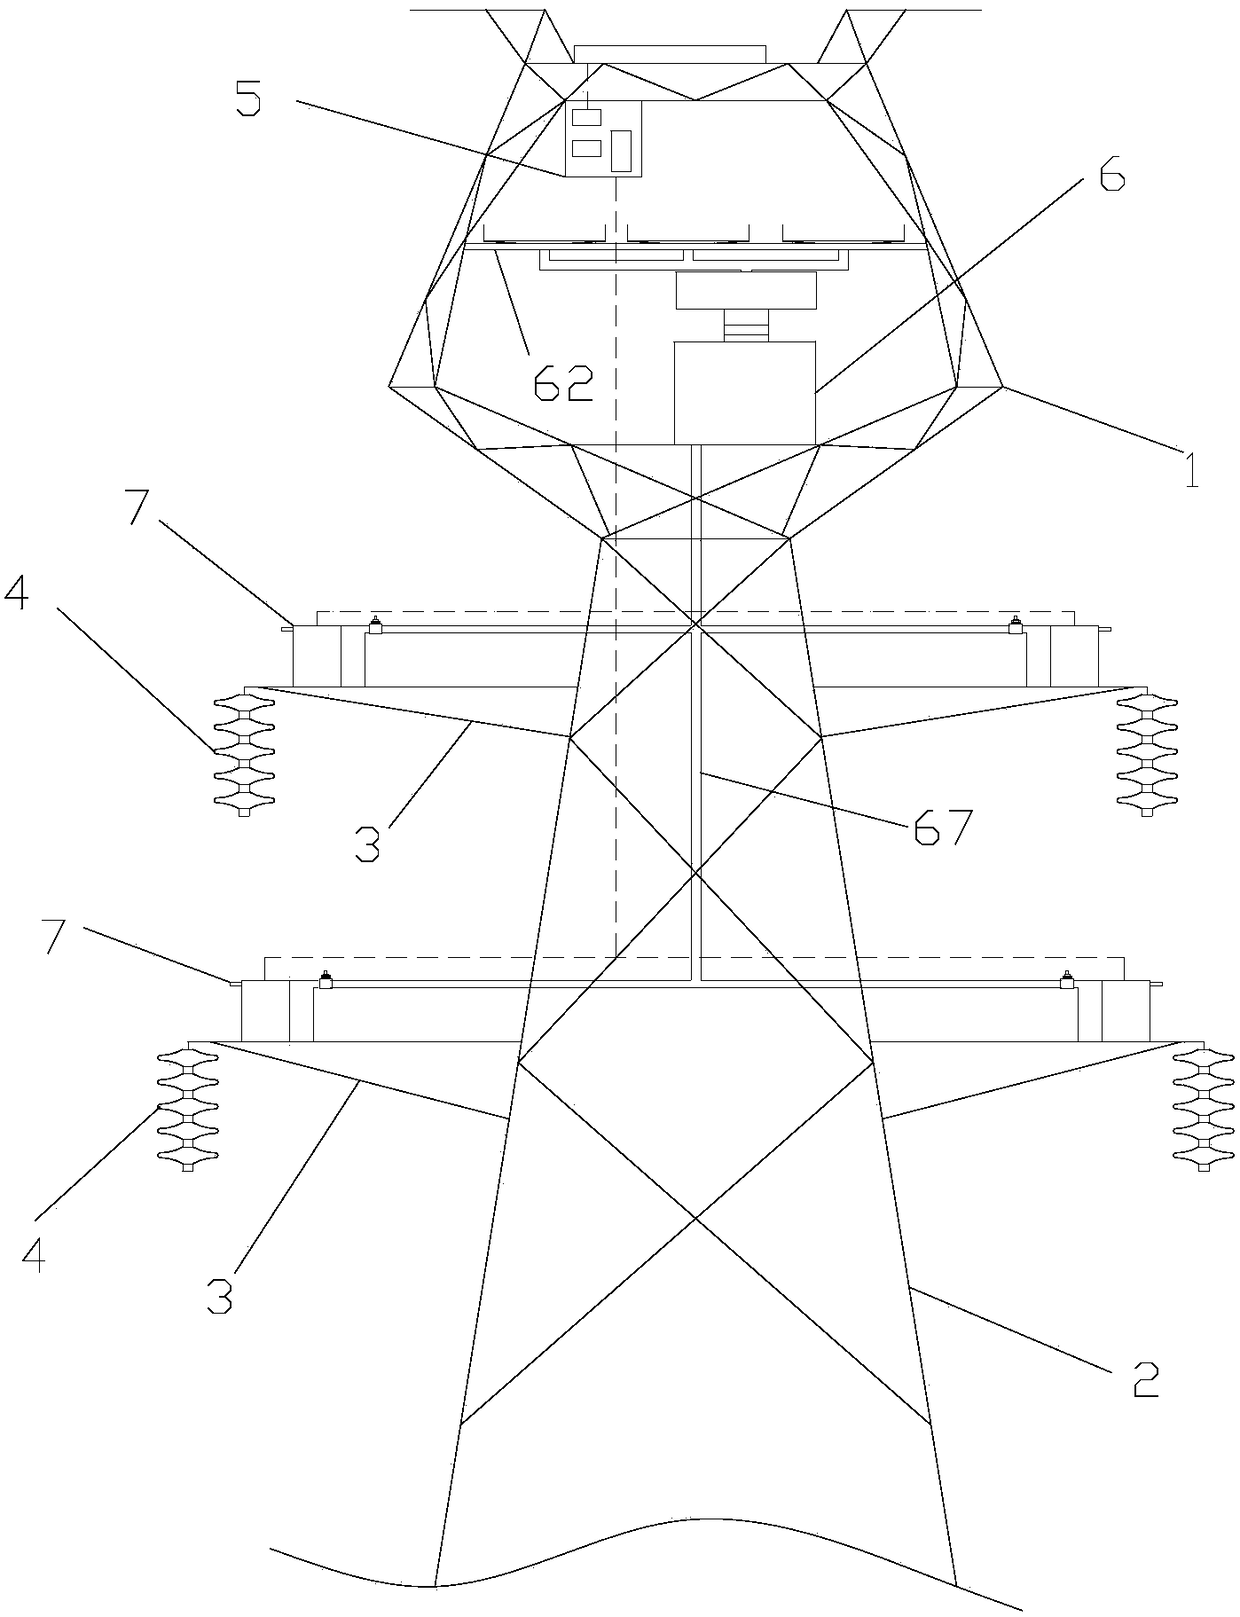 A transmission tower suitable for power transmission and its insulator bird repelling method